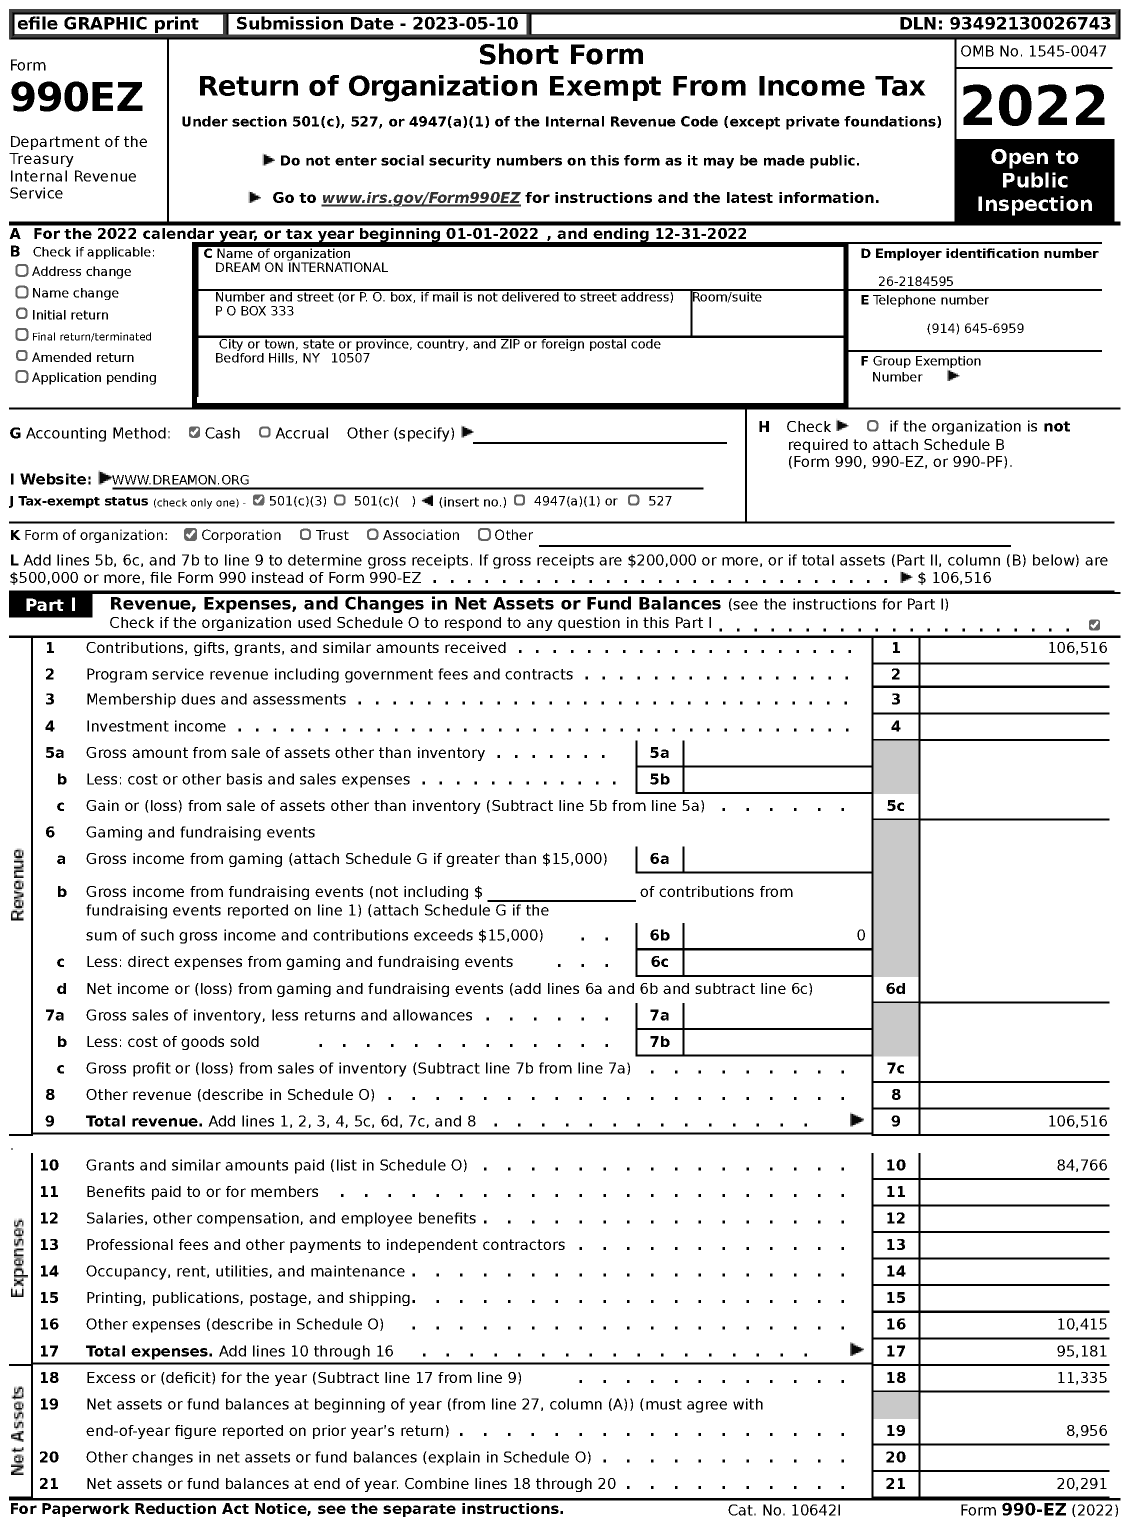 Image of first page of 2022 Form 990EZ for Dream on International